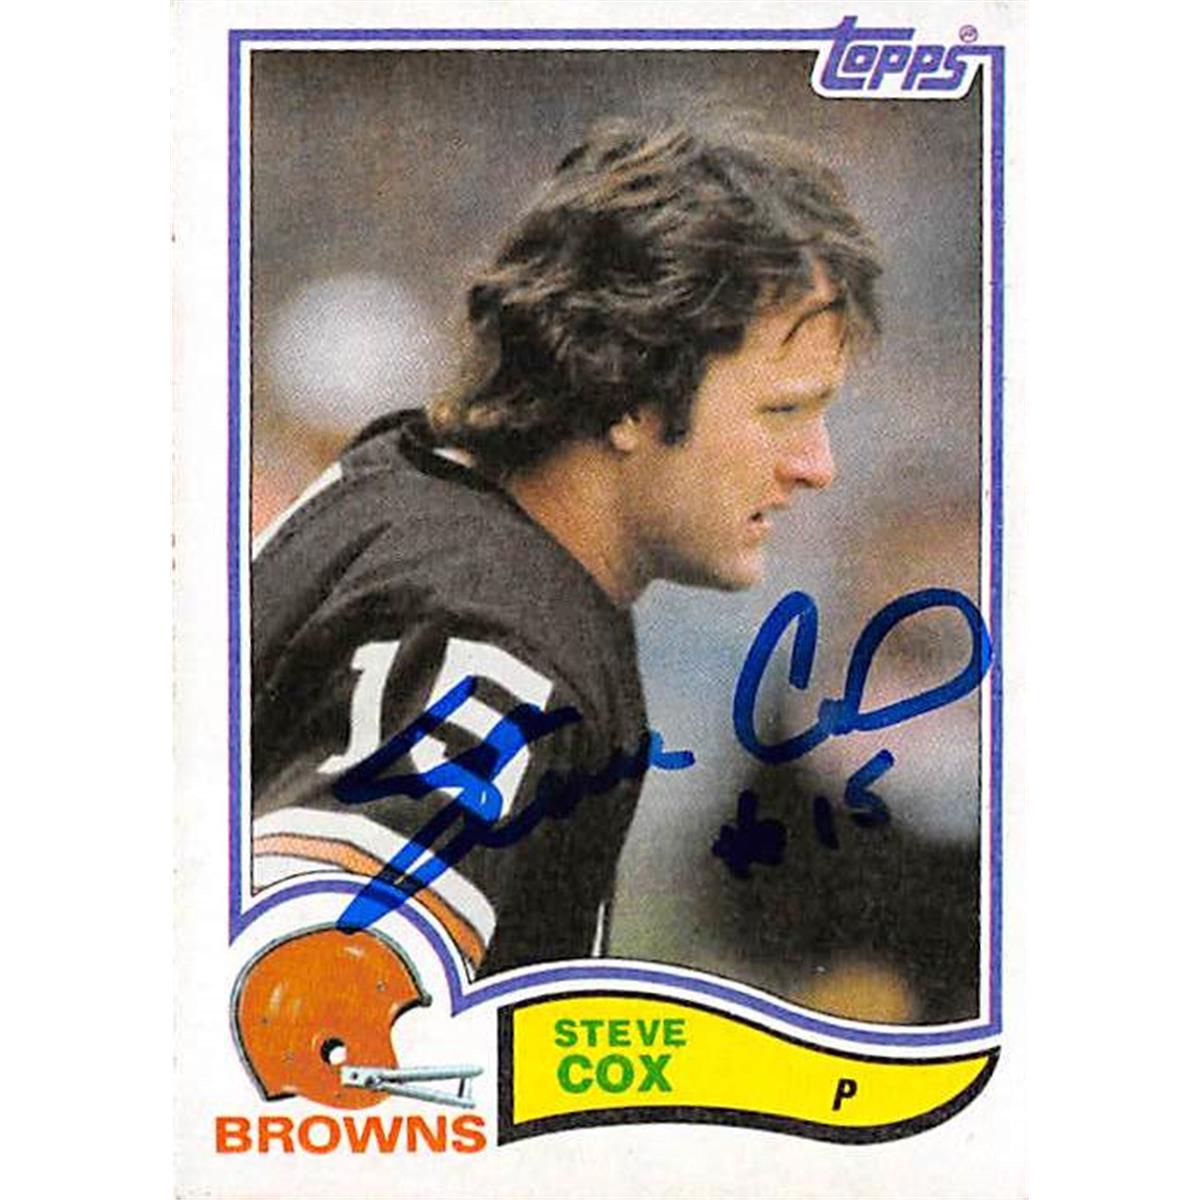 Picture of Autograph Warehouse 409868 Steve Cox Autographed Football Card - Cleveland Browns 1982 Topps No.59 Rookie